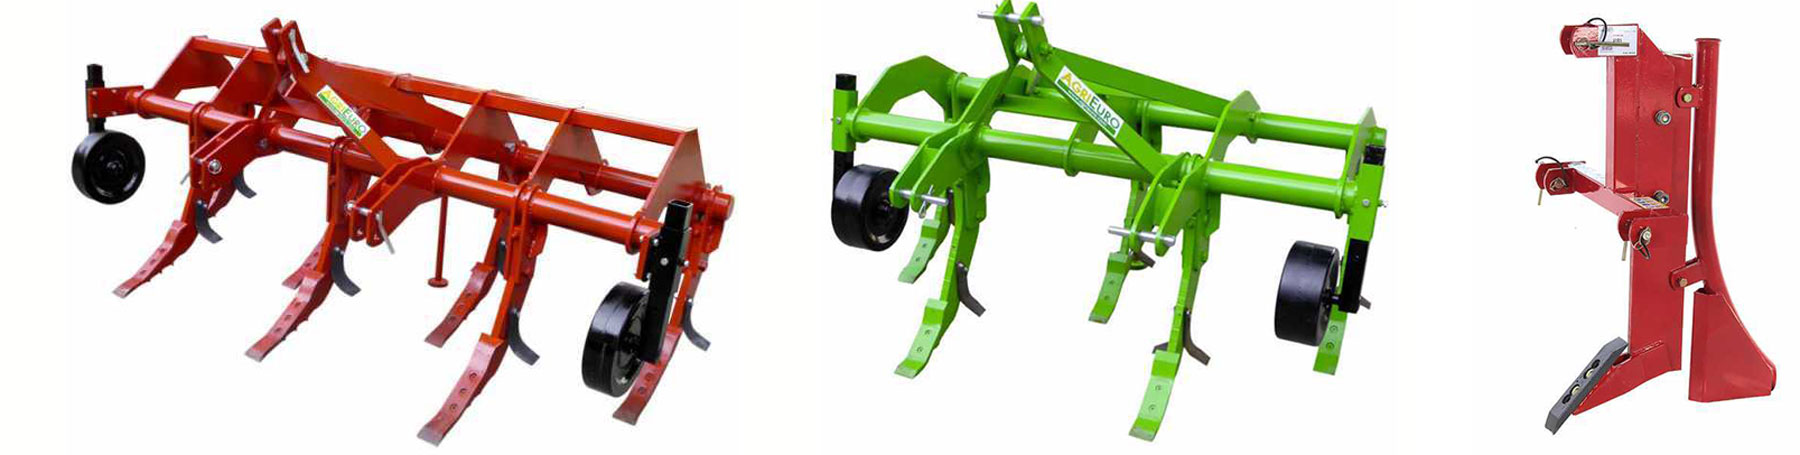 Tractor-mounted Rippers